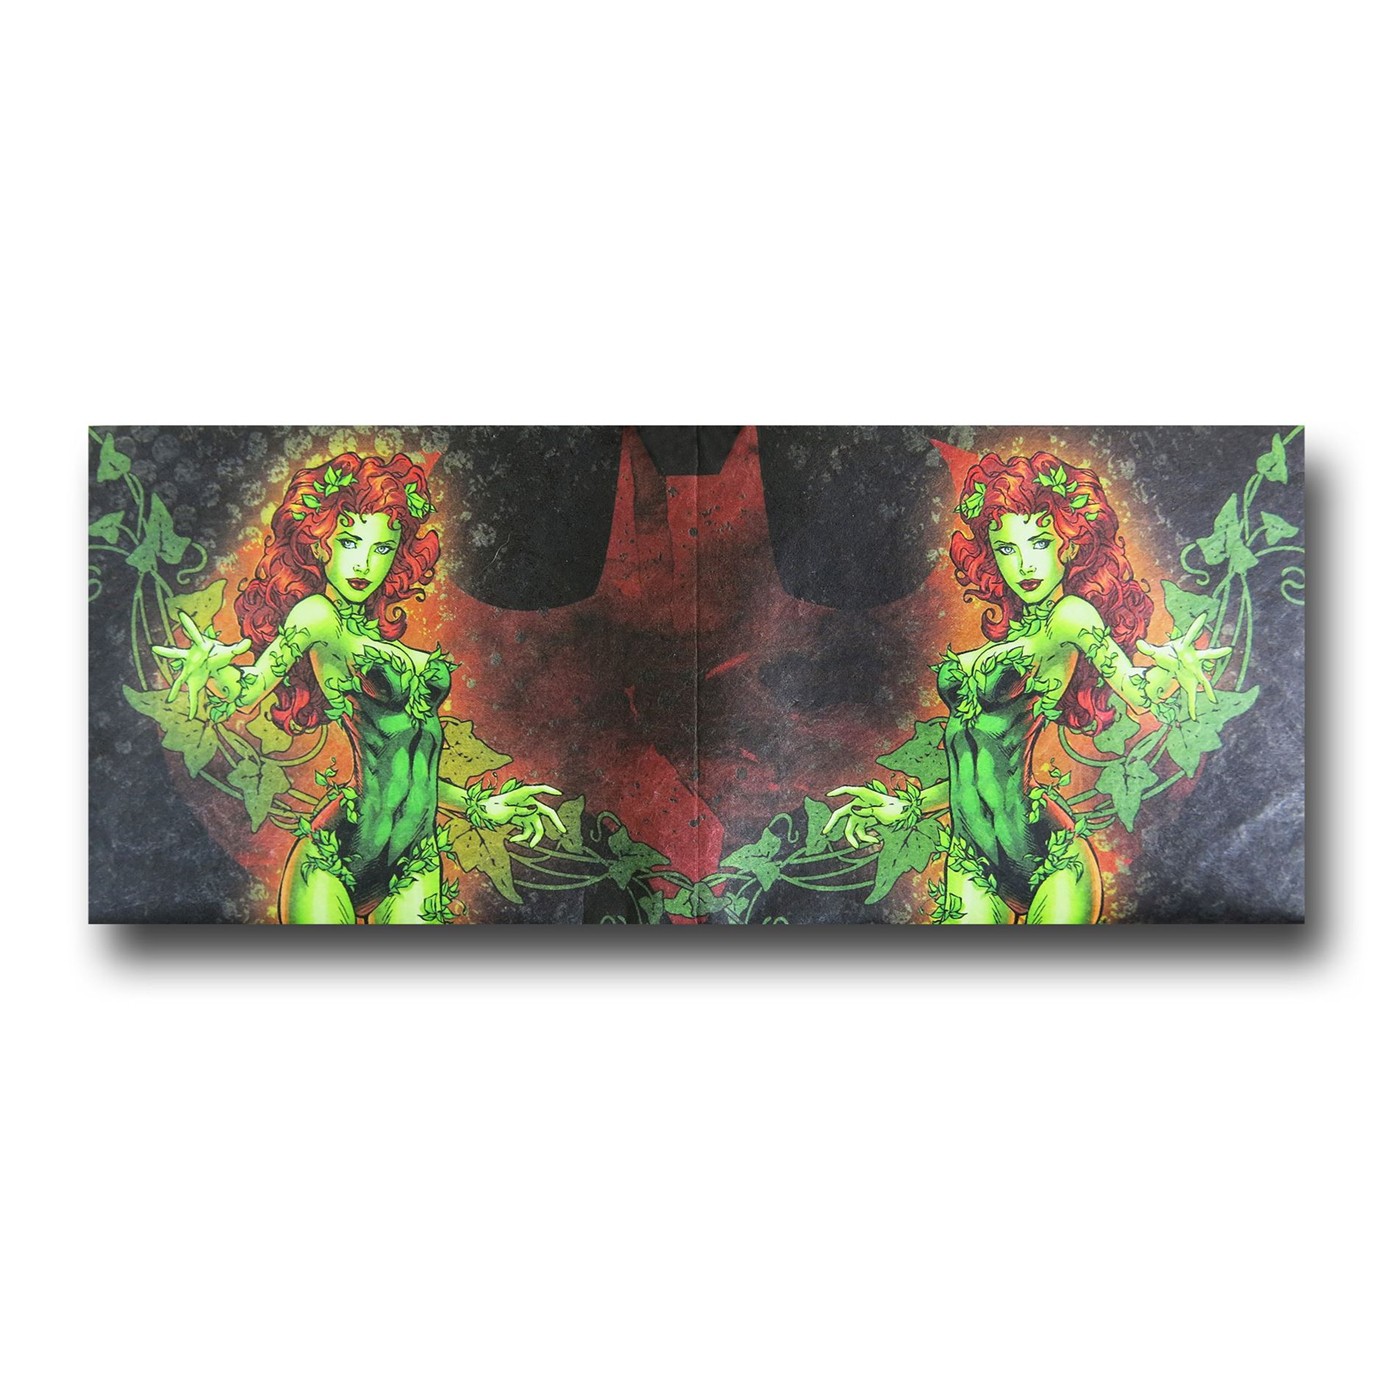 Poison Ivy Tyvek Mighty Wallet